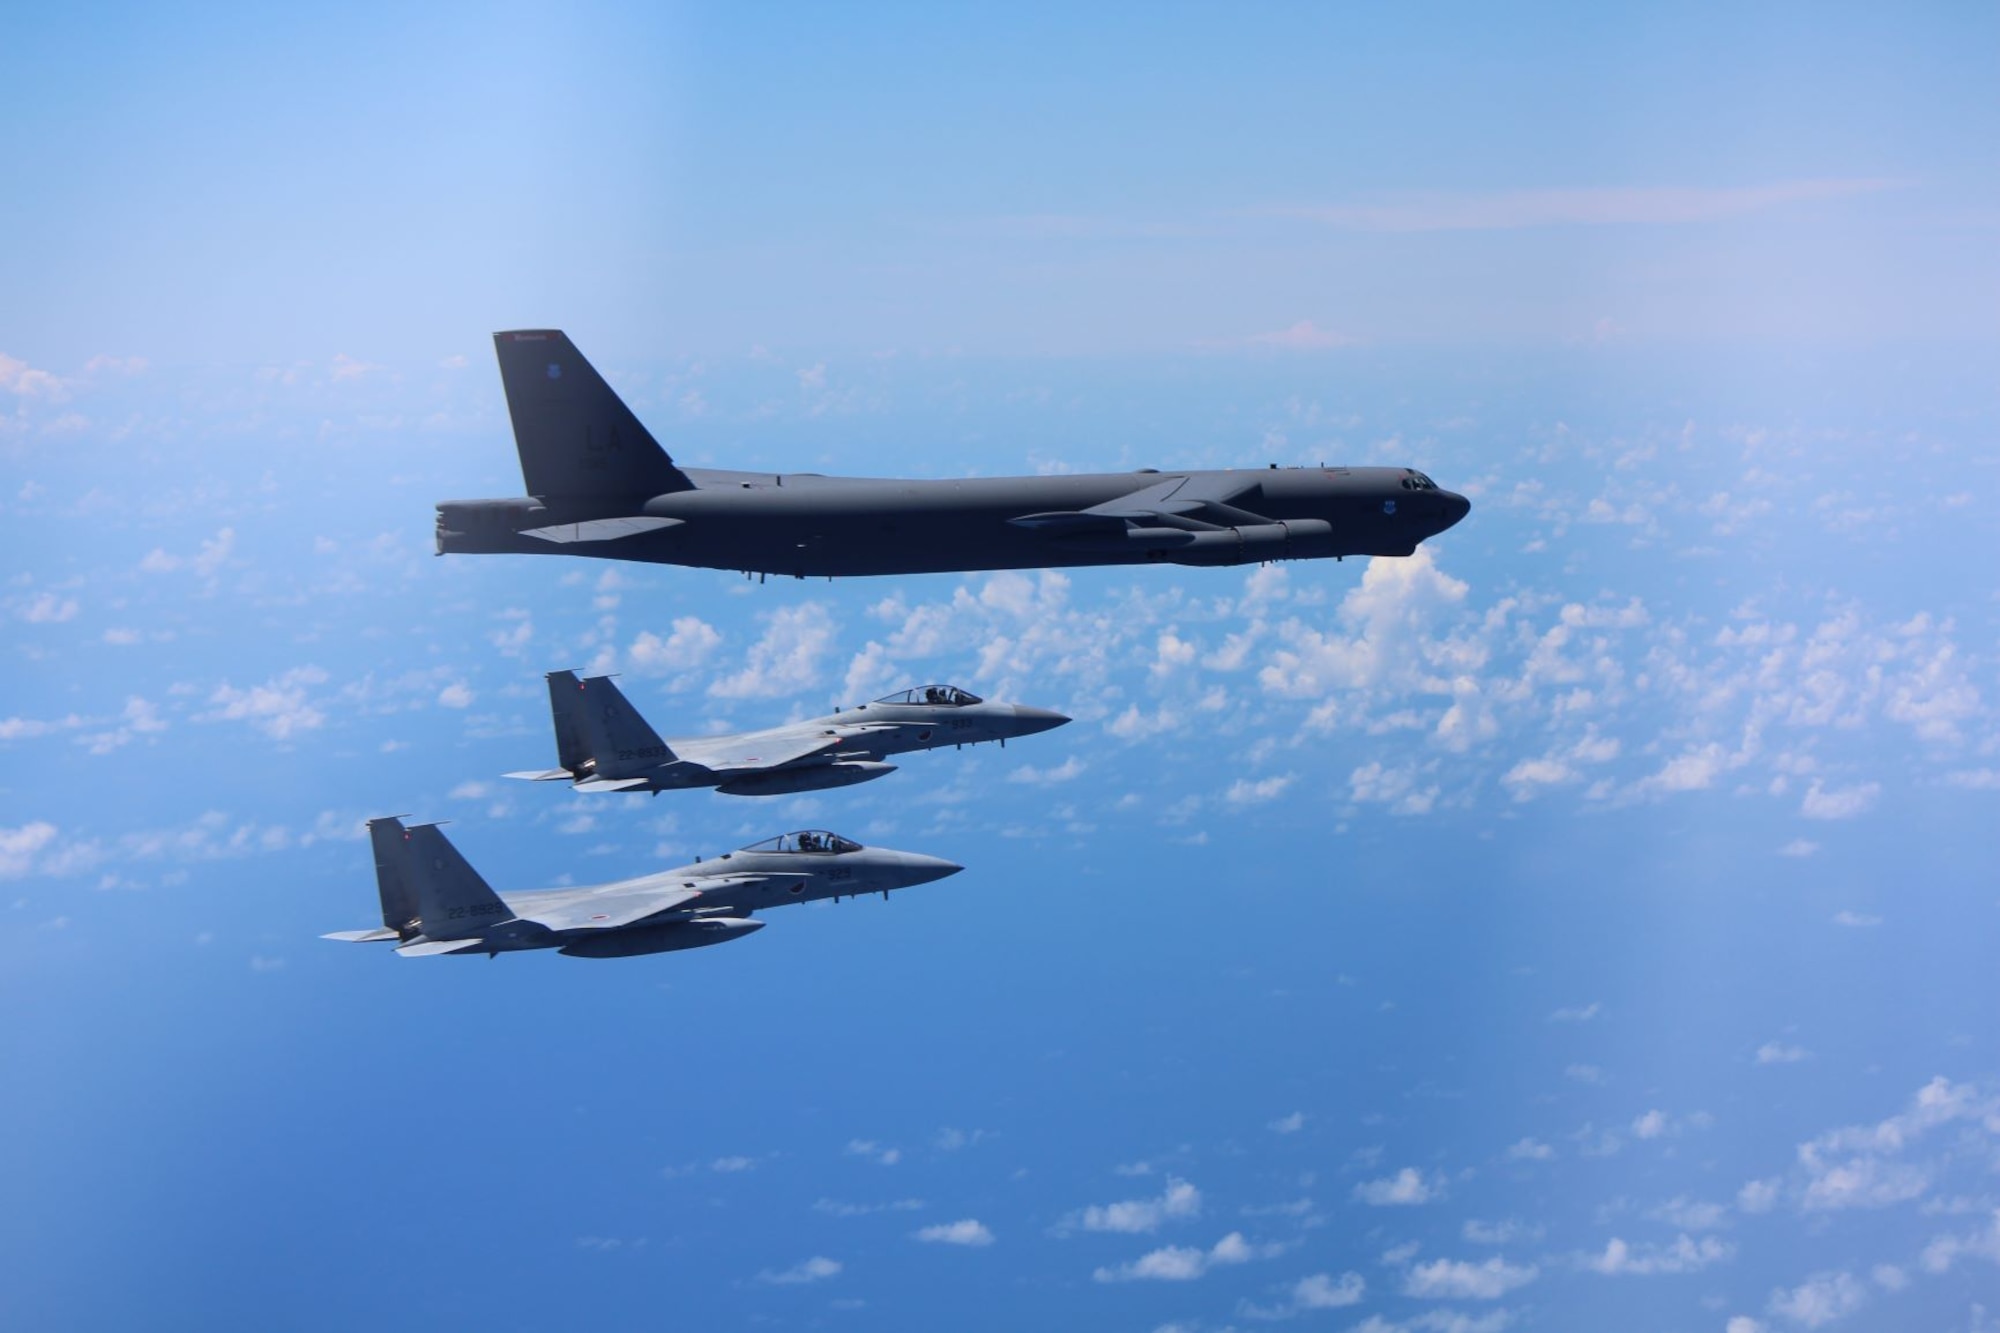 Two Japan Air Self-Defense Force (JASDF) F-15's escort a U.S. Air Force B-52 Stratofortress August 31, 2021 over the Indo-Pacific region. The JASDF and the U.S. Air Force conducted bilateral training to enhance deterrence and response capabilities. (Photo by Japan Air Self-Defense Force)